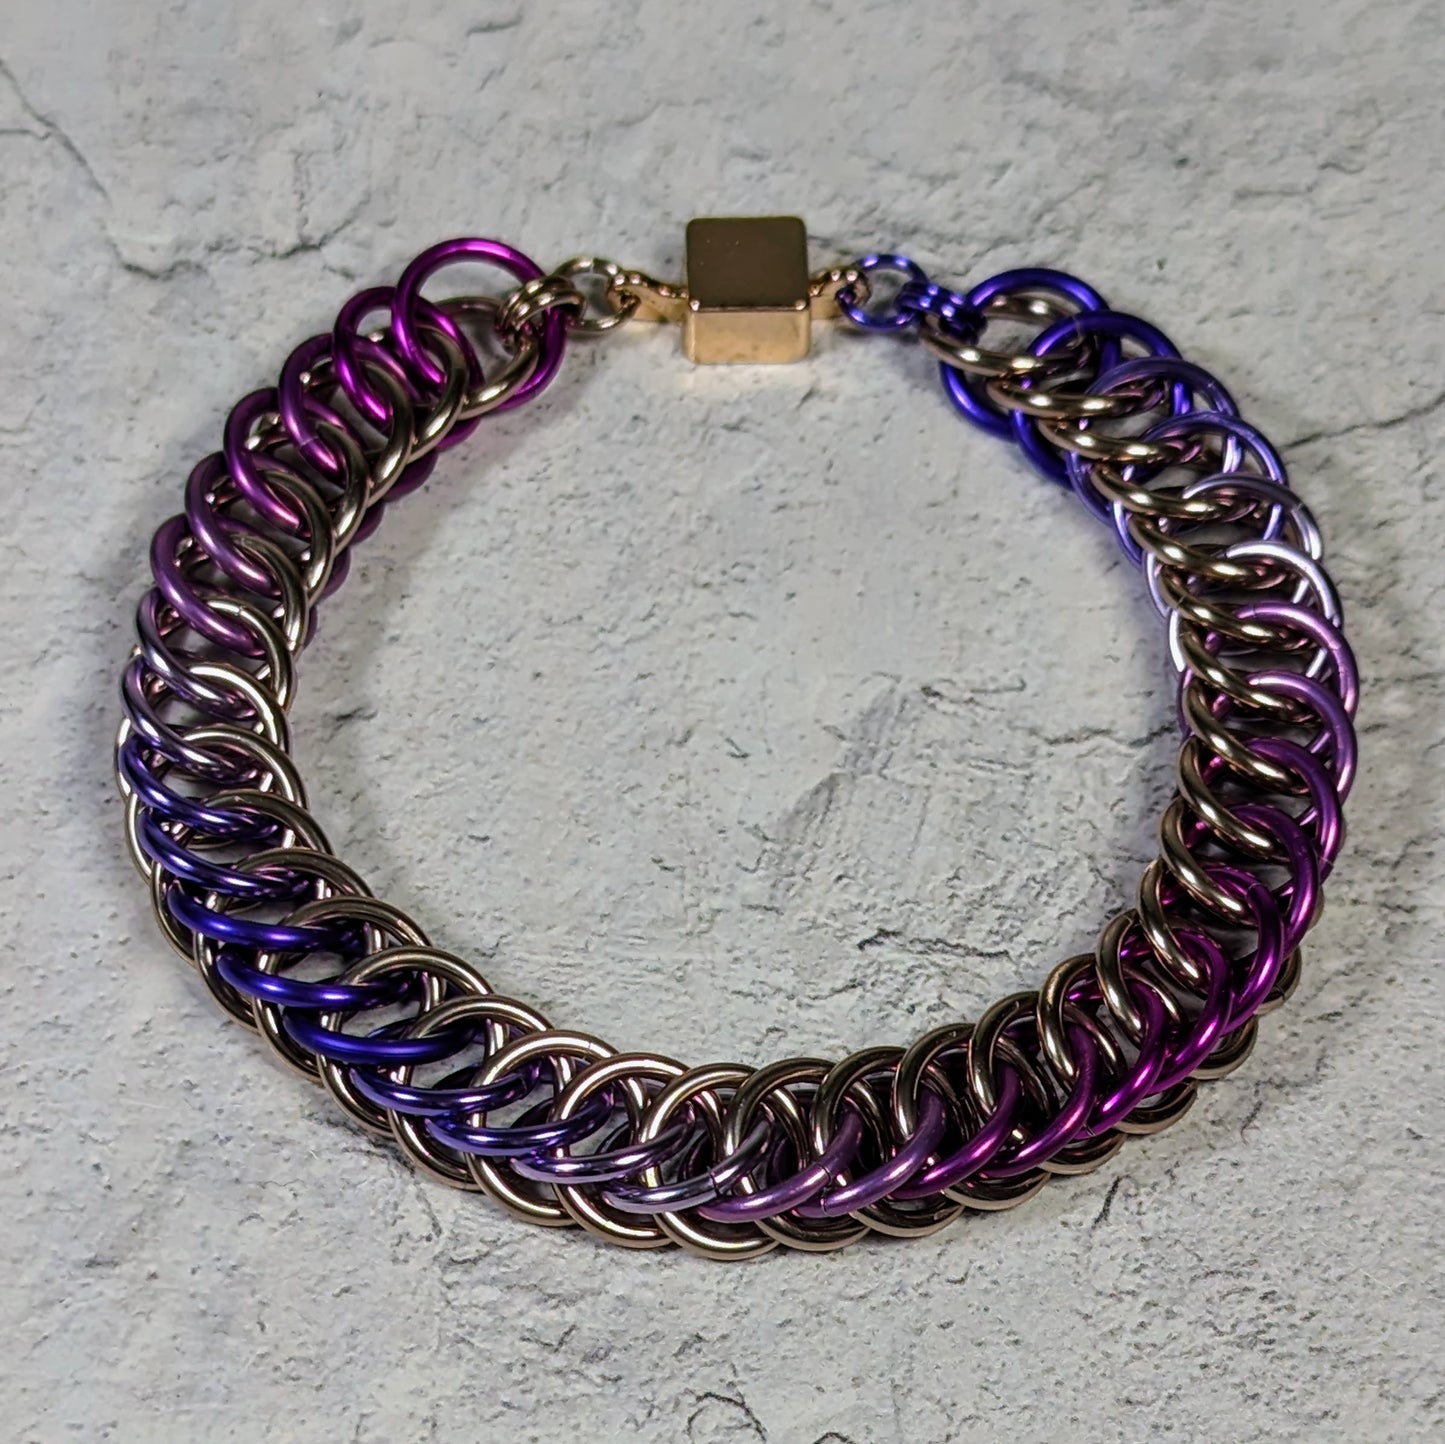 Variegated purples chainmaille bracelet